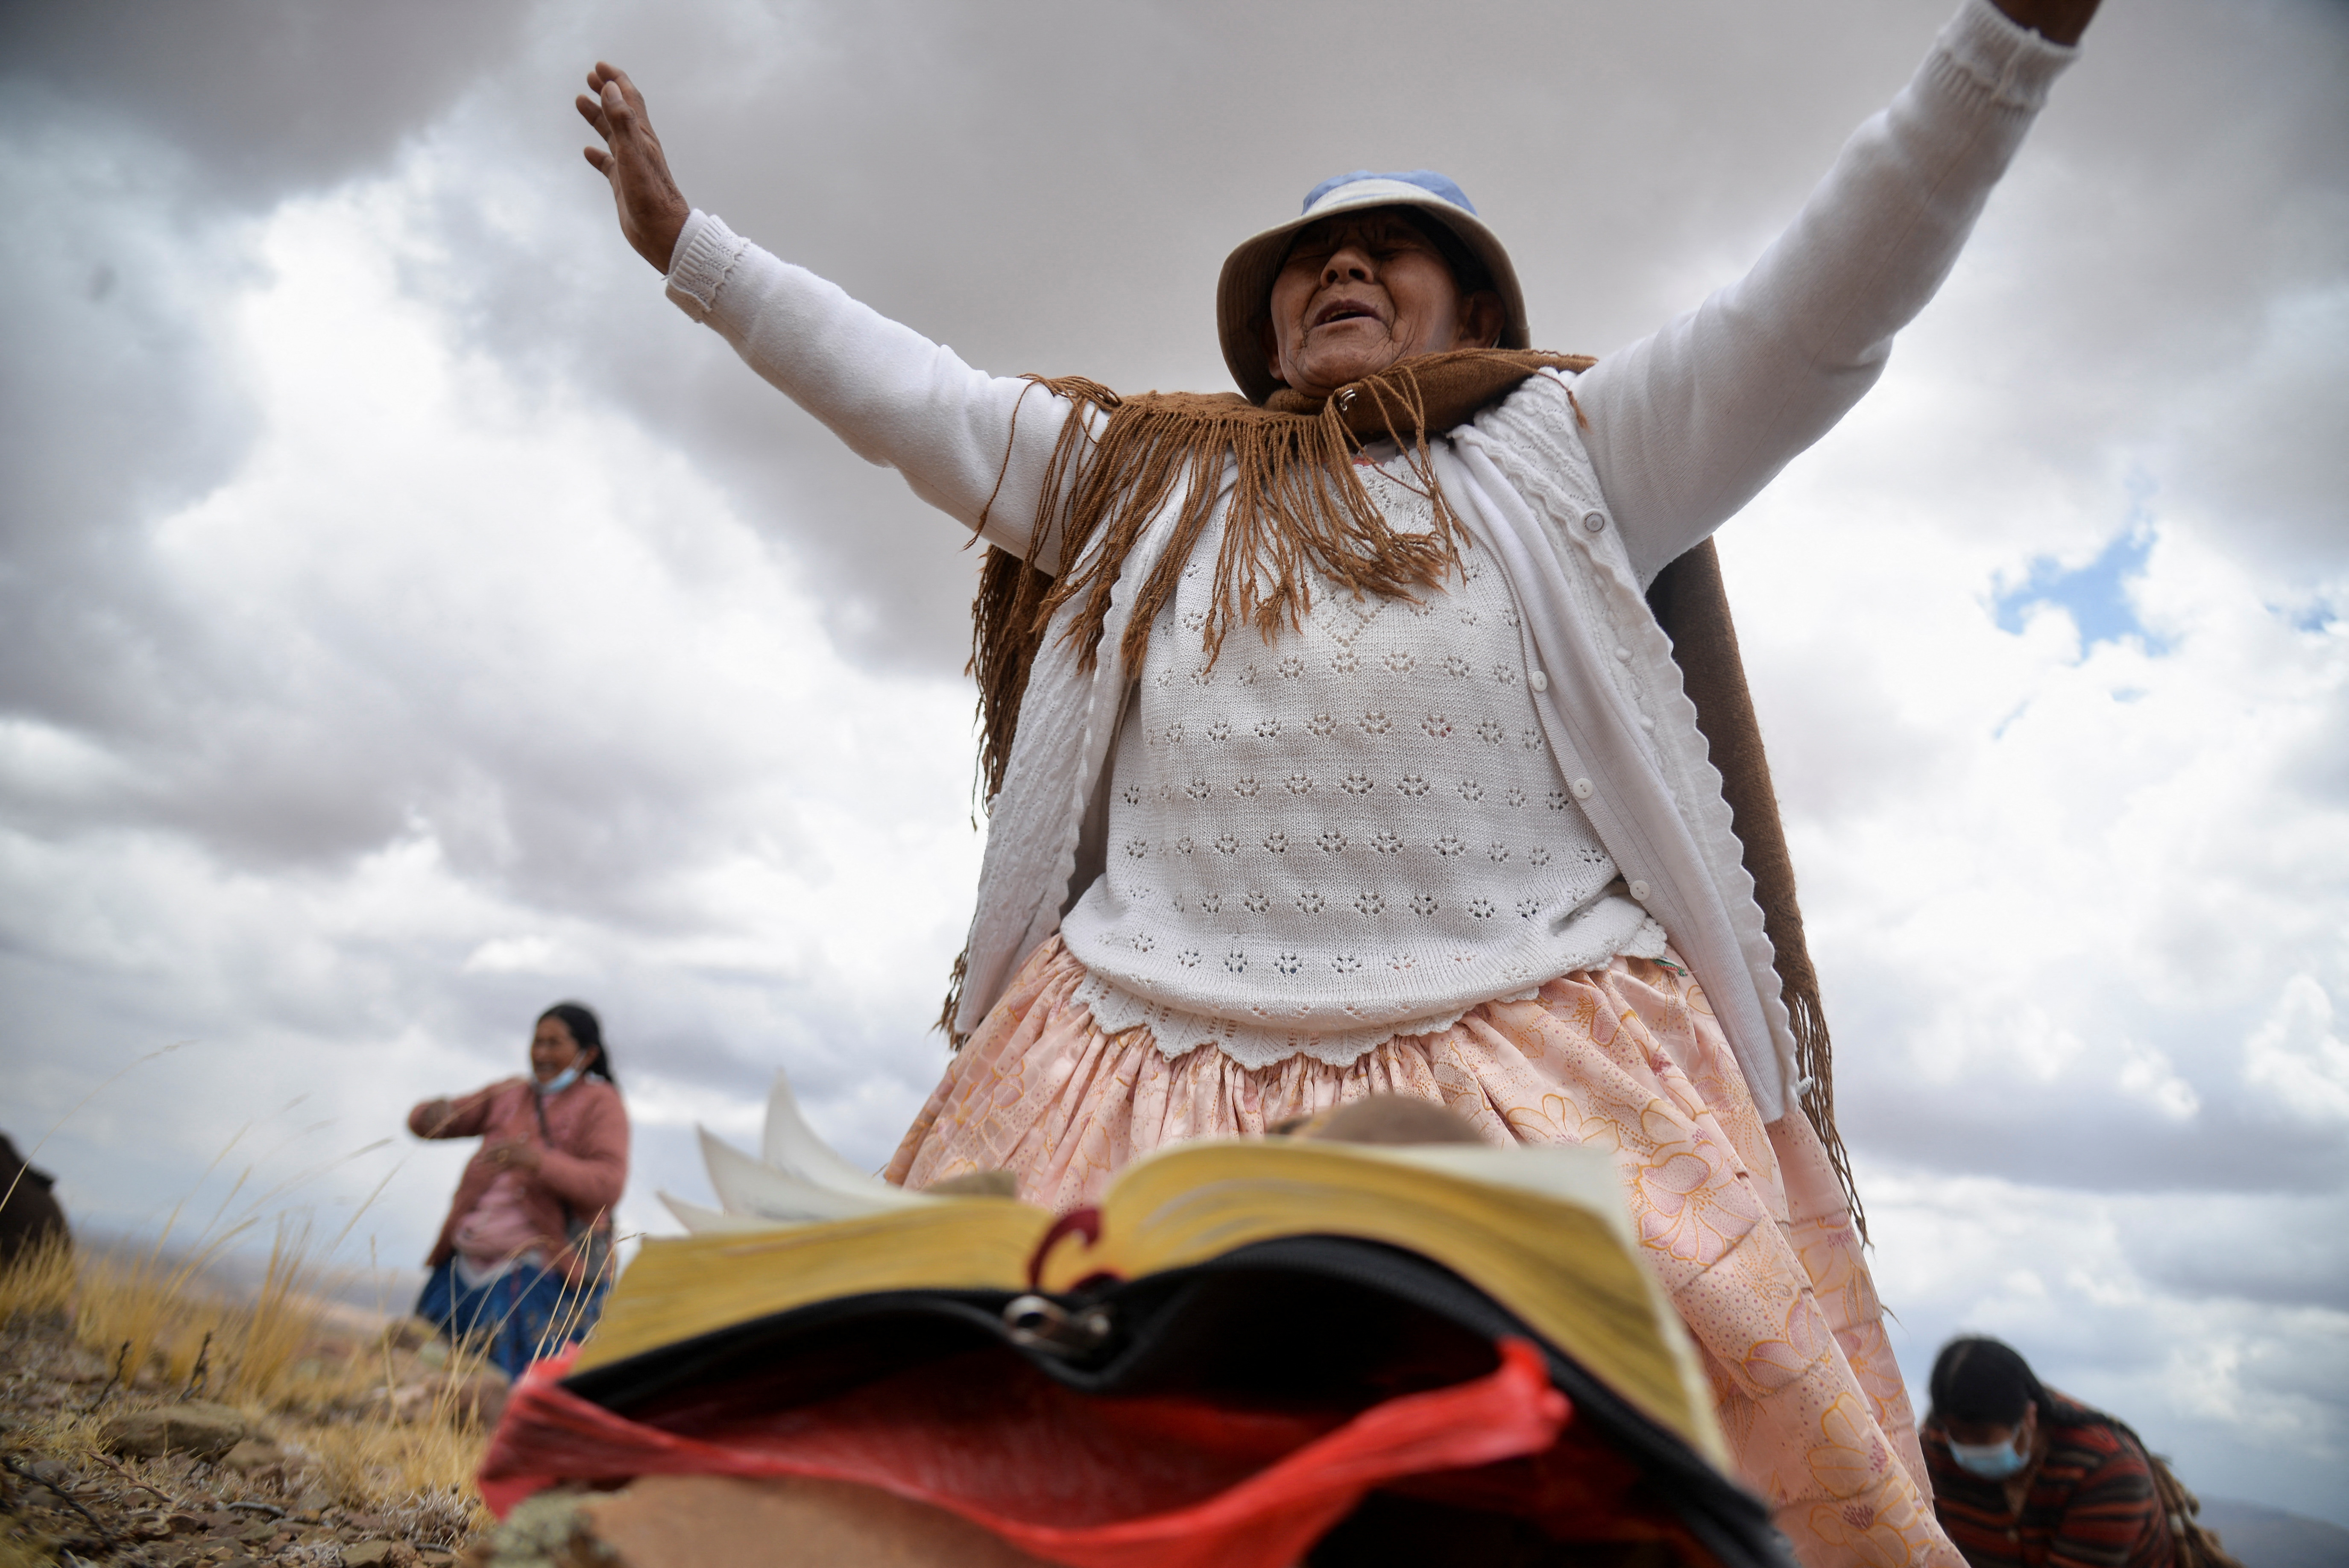 In South America's Andes locals pray for rain amid drought